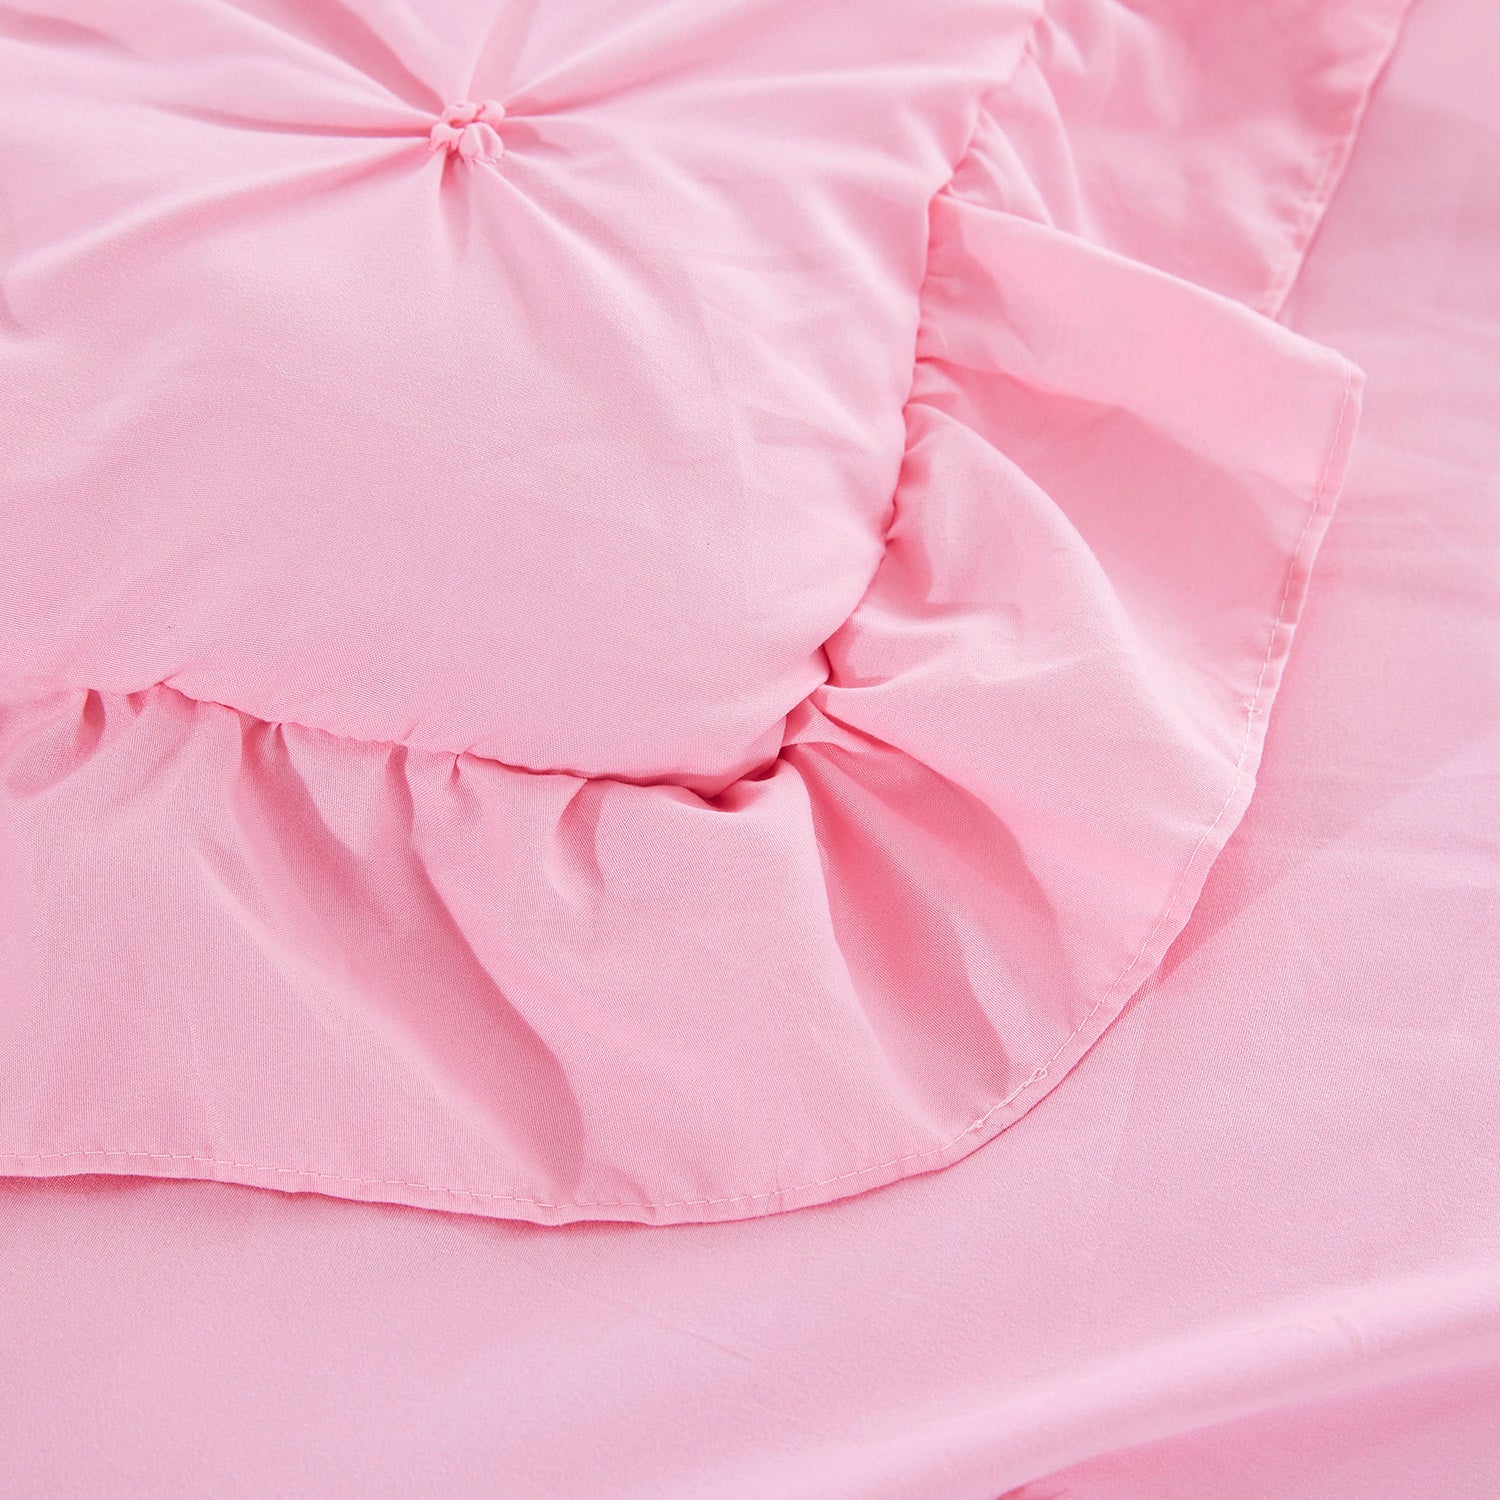 HANIA 5PC PINK BEDDING COMFORTER SET. RUFFLE & PATCHWORK, MICROFIBER FABRIC, FADE RESISTANT, SUPER SOFT, BED IN A BAG